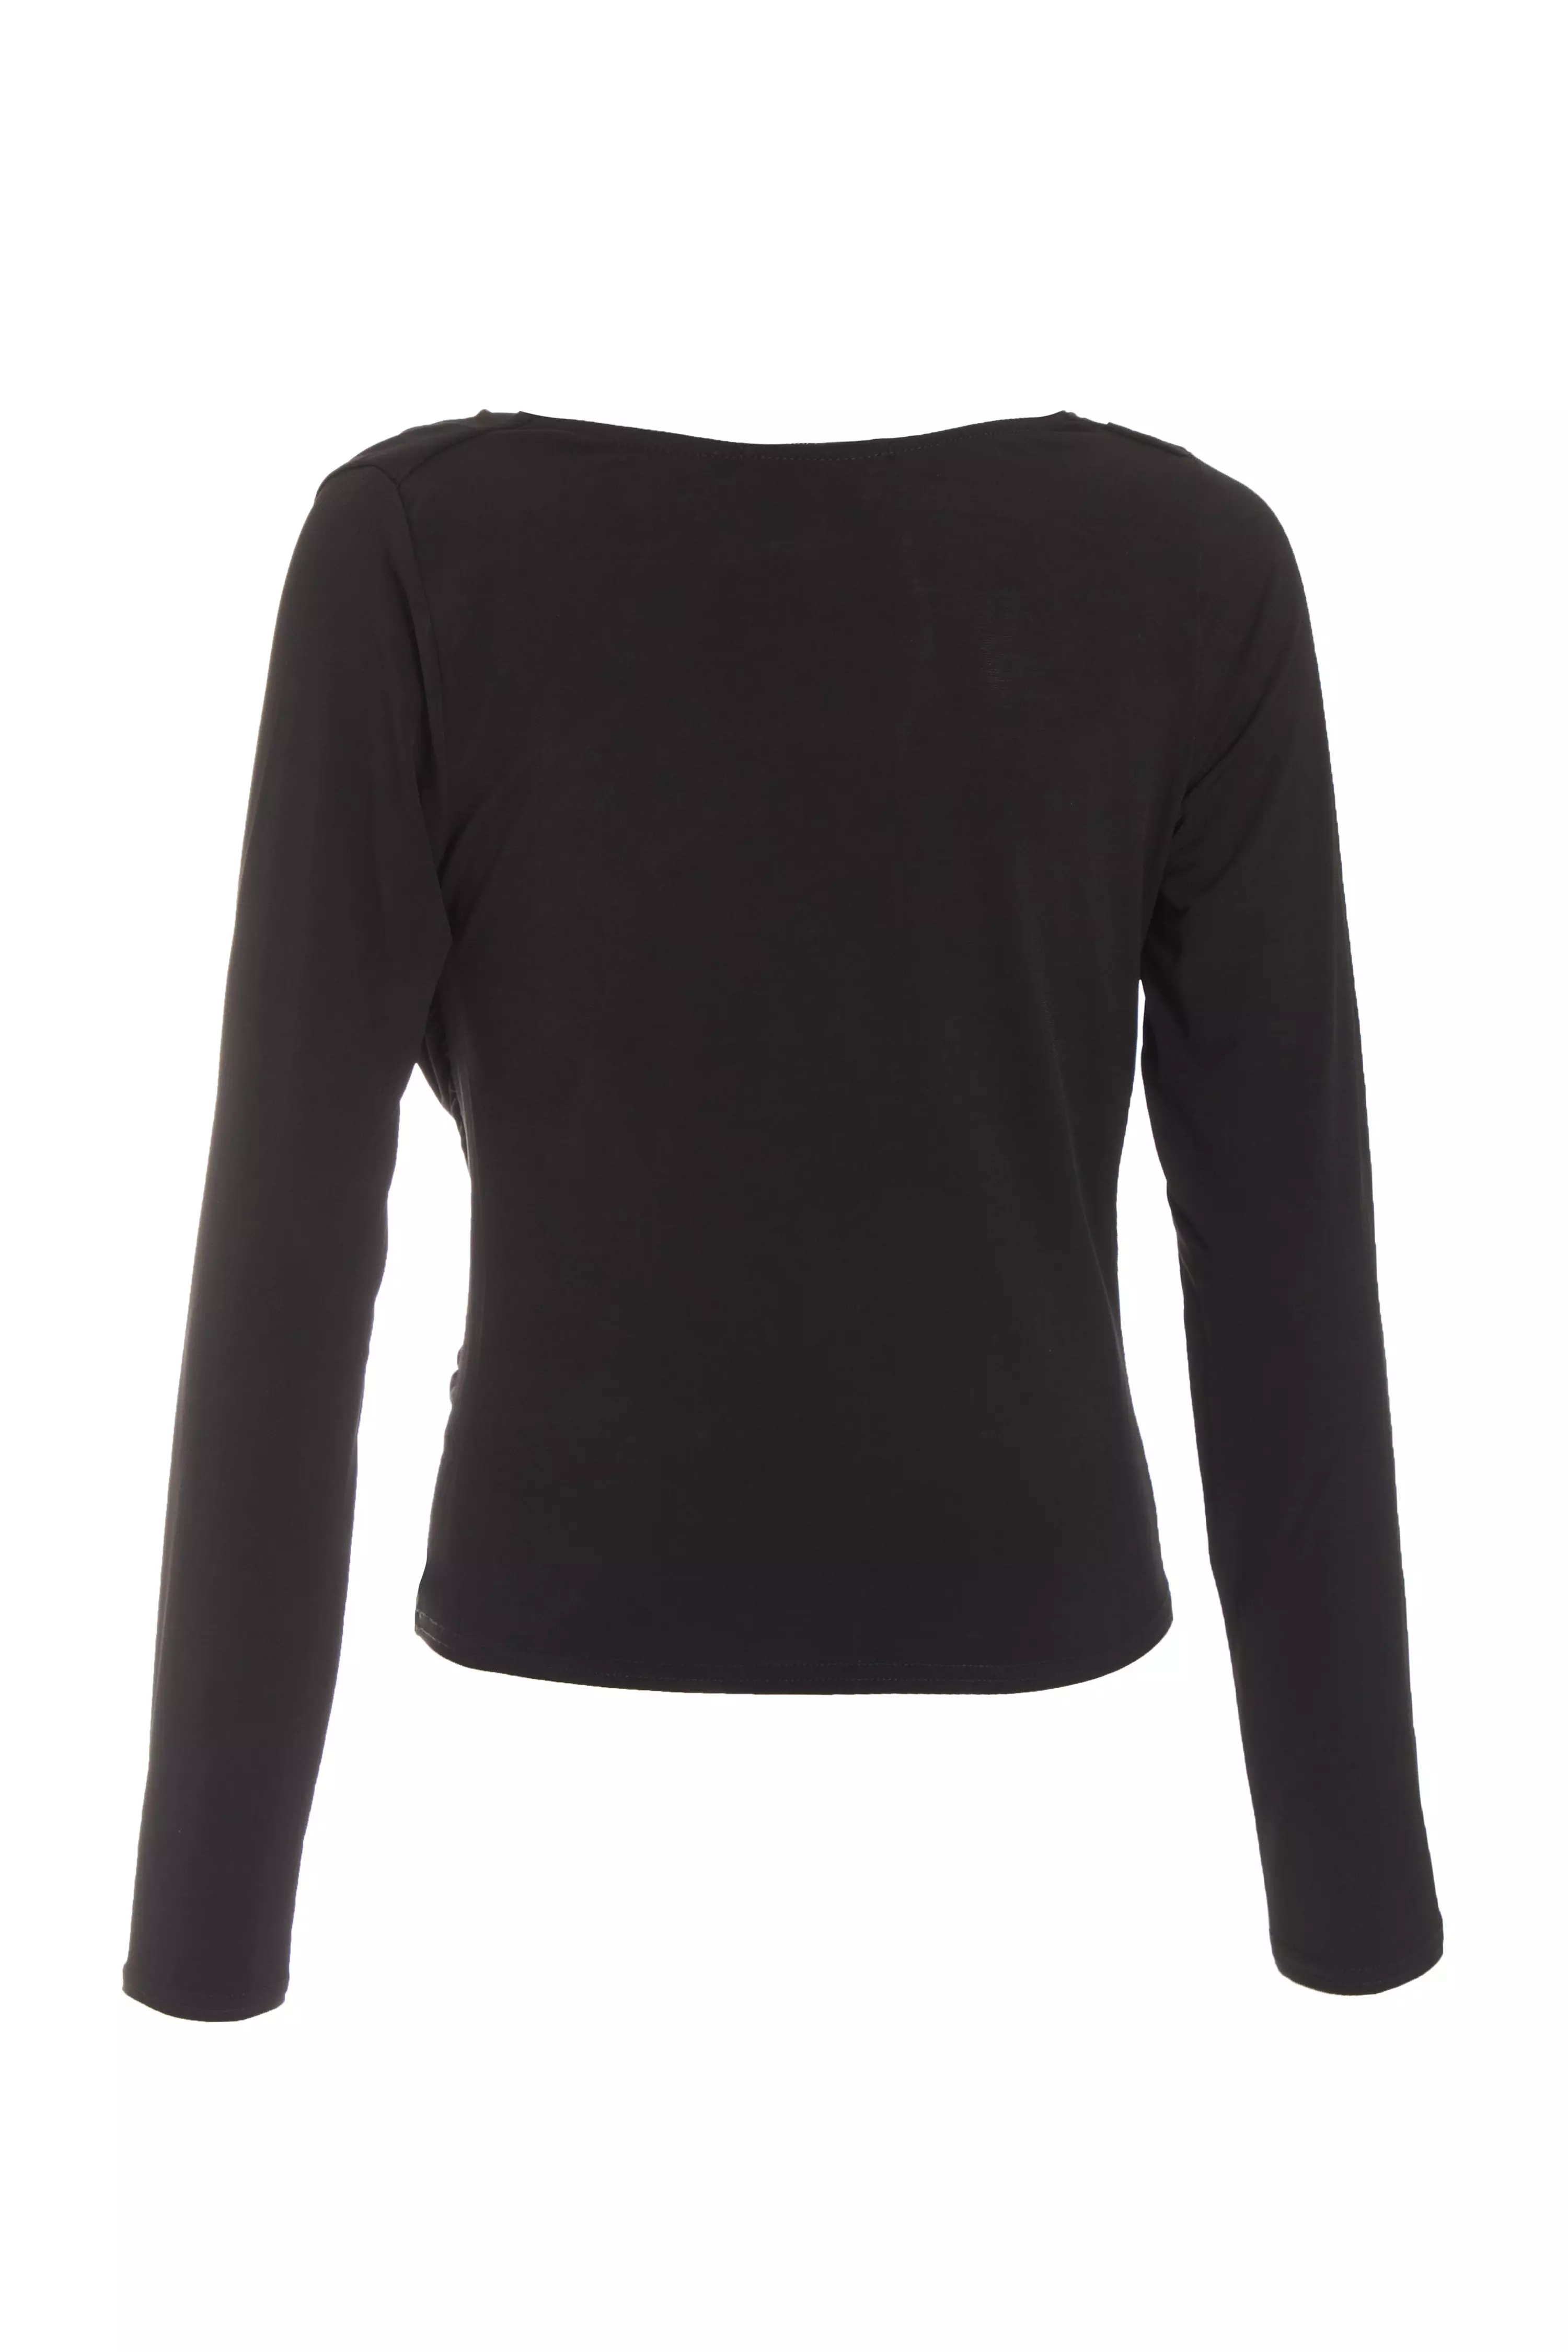 Black Ruched Cowl Neck Top